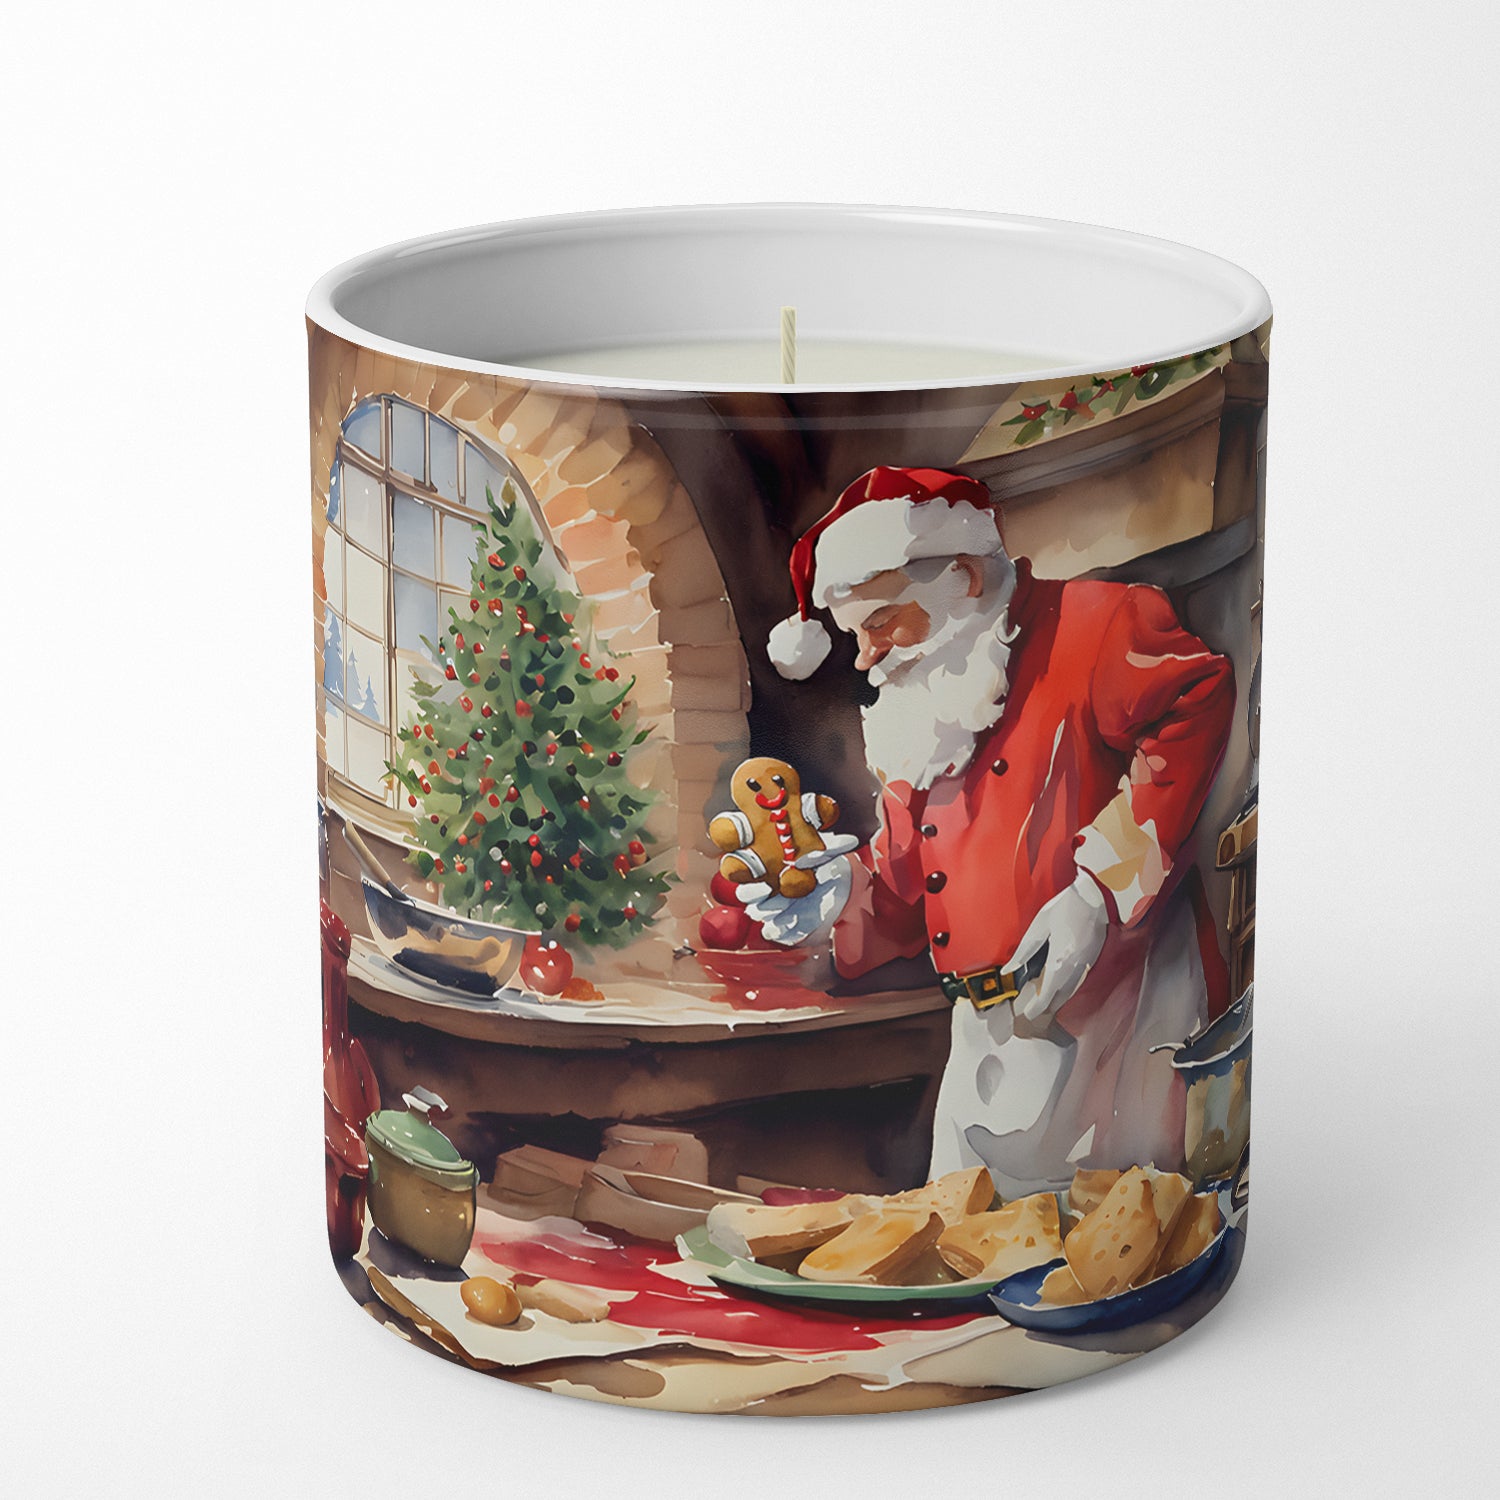 Buy this Cookies with Santa Claus Decorative Soy Candle